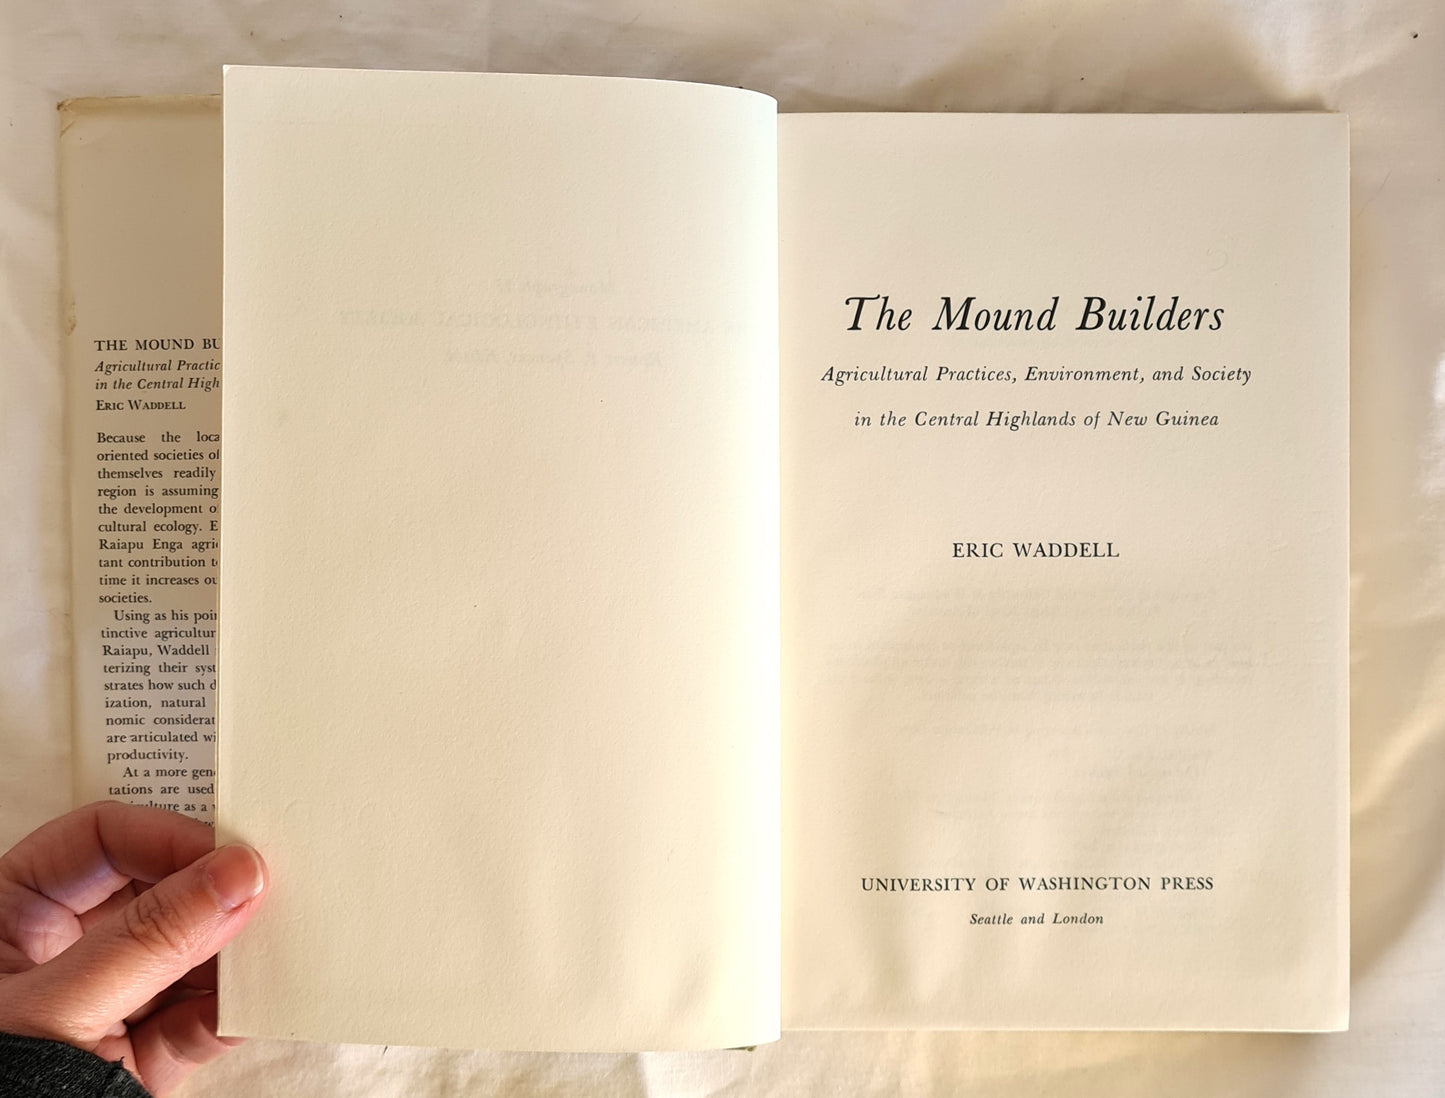 The Mound Builders by Eric Waddell